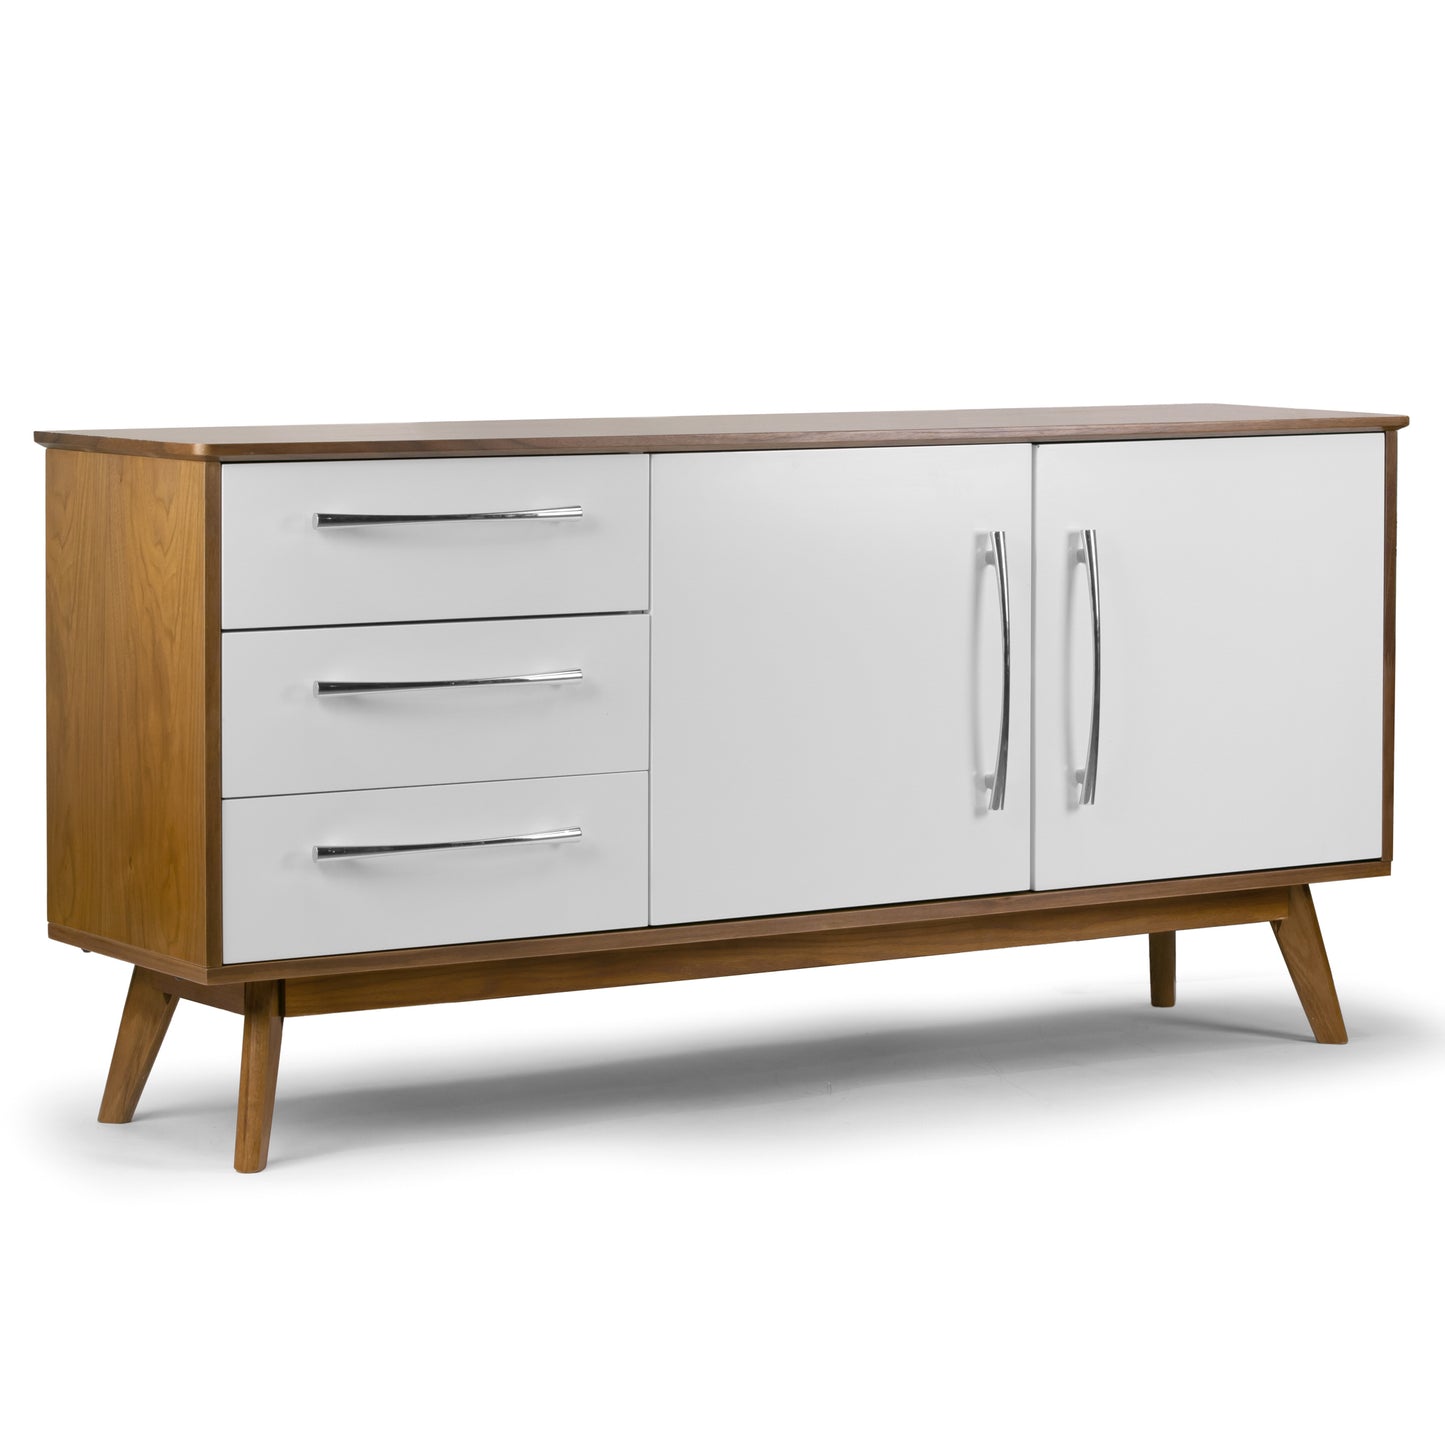 Alva Scandinavian Style Sideboard Buffet Table with Cabinet and Drawers